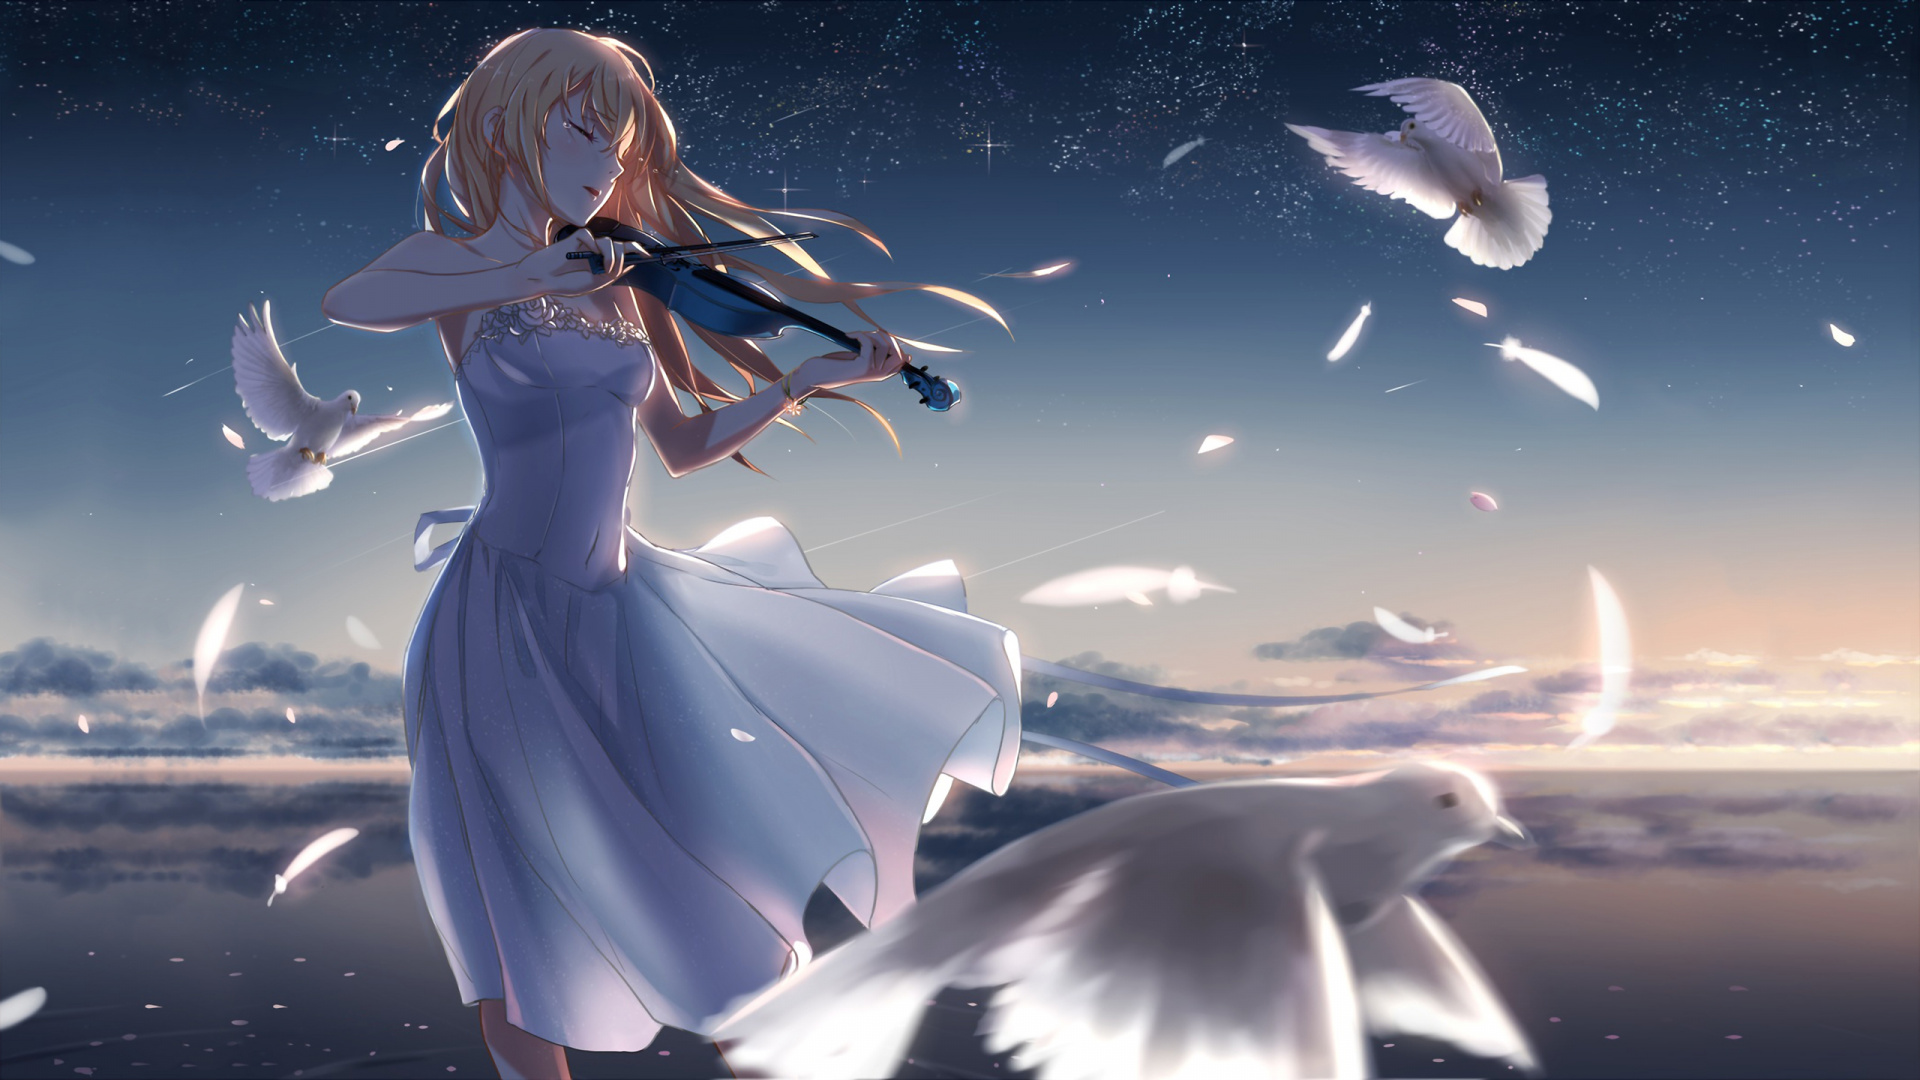 Femme en Robe Blanche Personnage Anime. Wallpaper in 1920x1080 Resolution